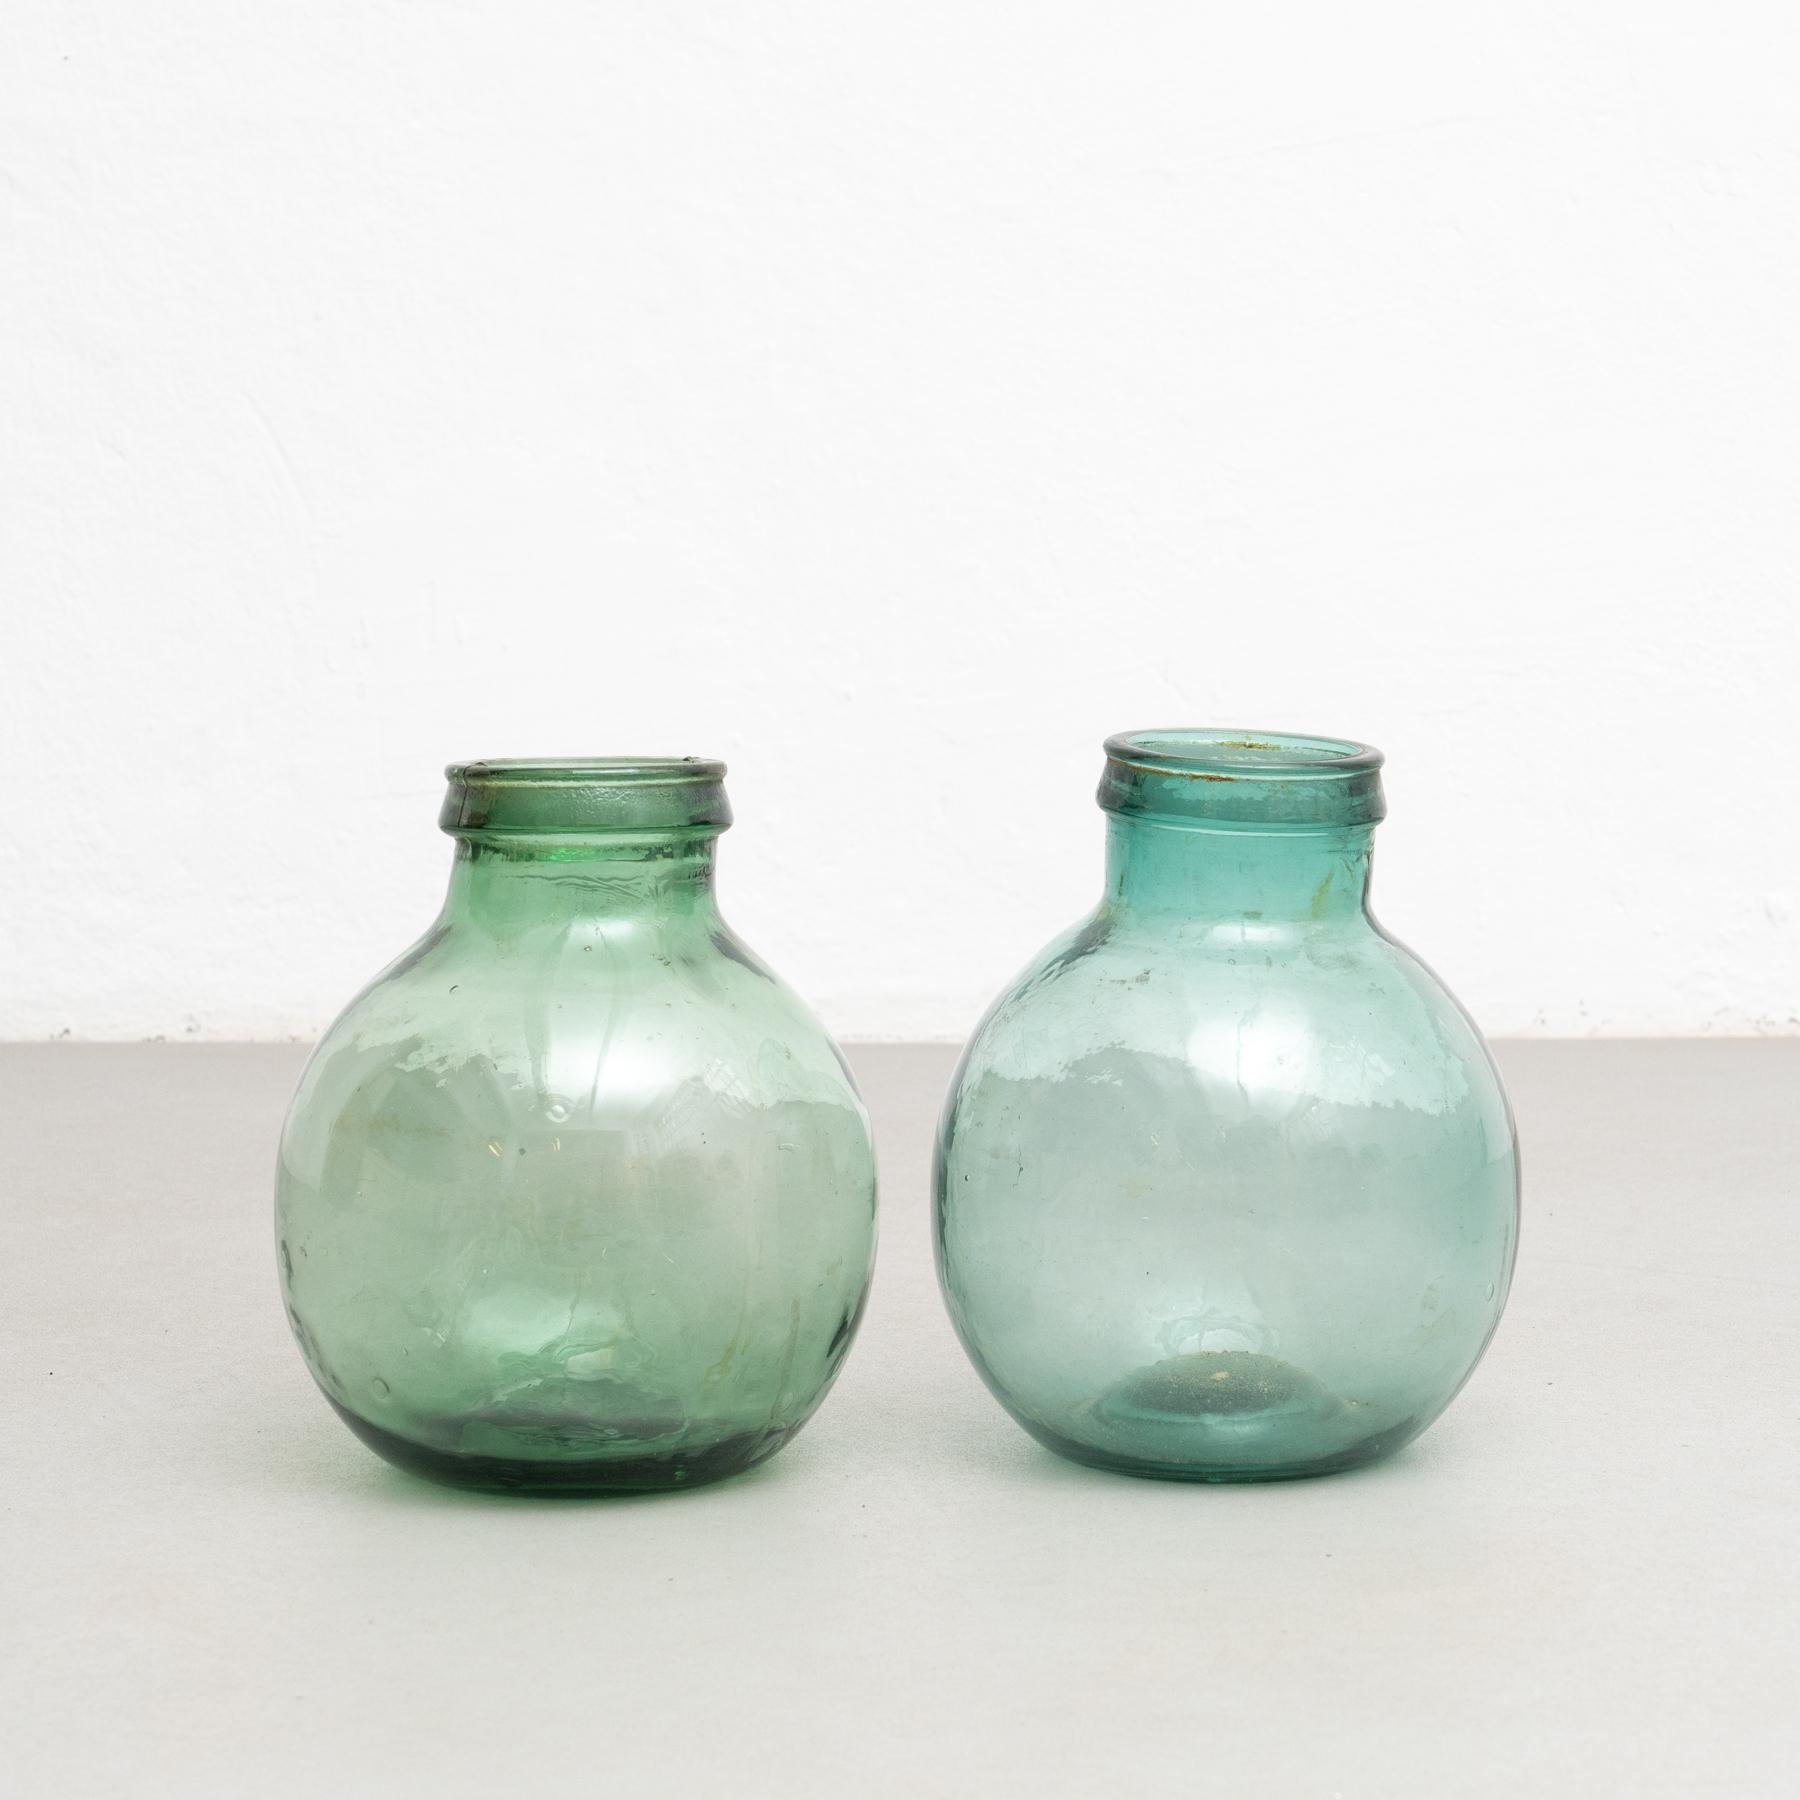 A set of two antique Demijohn glass bottles from Barcelona.

Made by unknown manufacturer in Spain, circa 1950.

In original condition with minor wear consistent of age and use, preserving a beautiful patina.

Materials:

Glass.